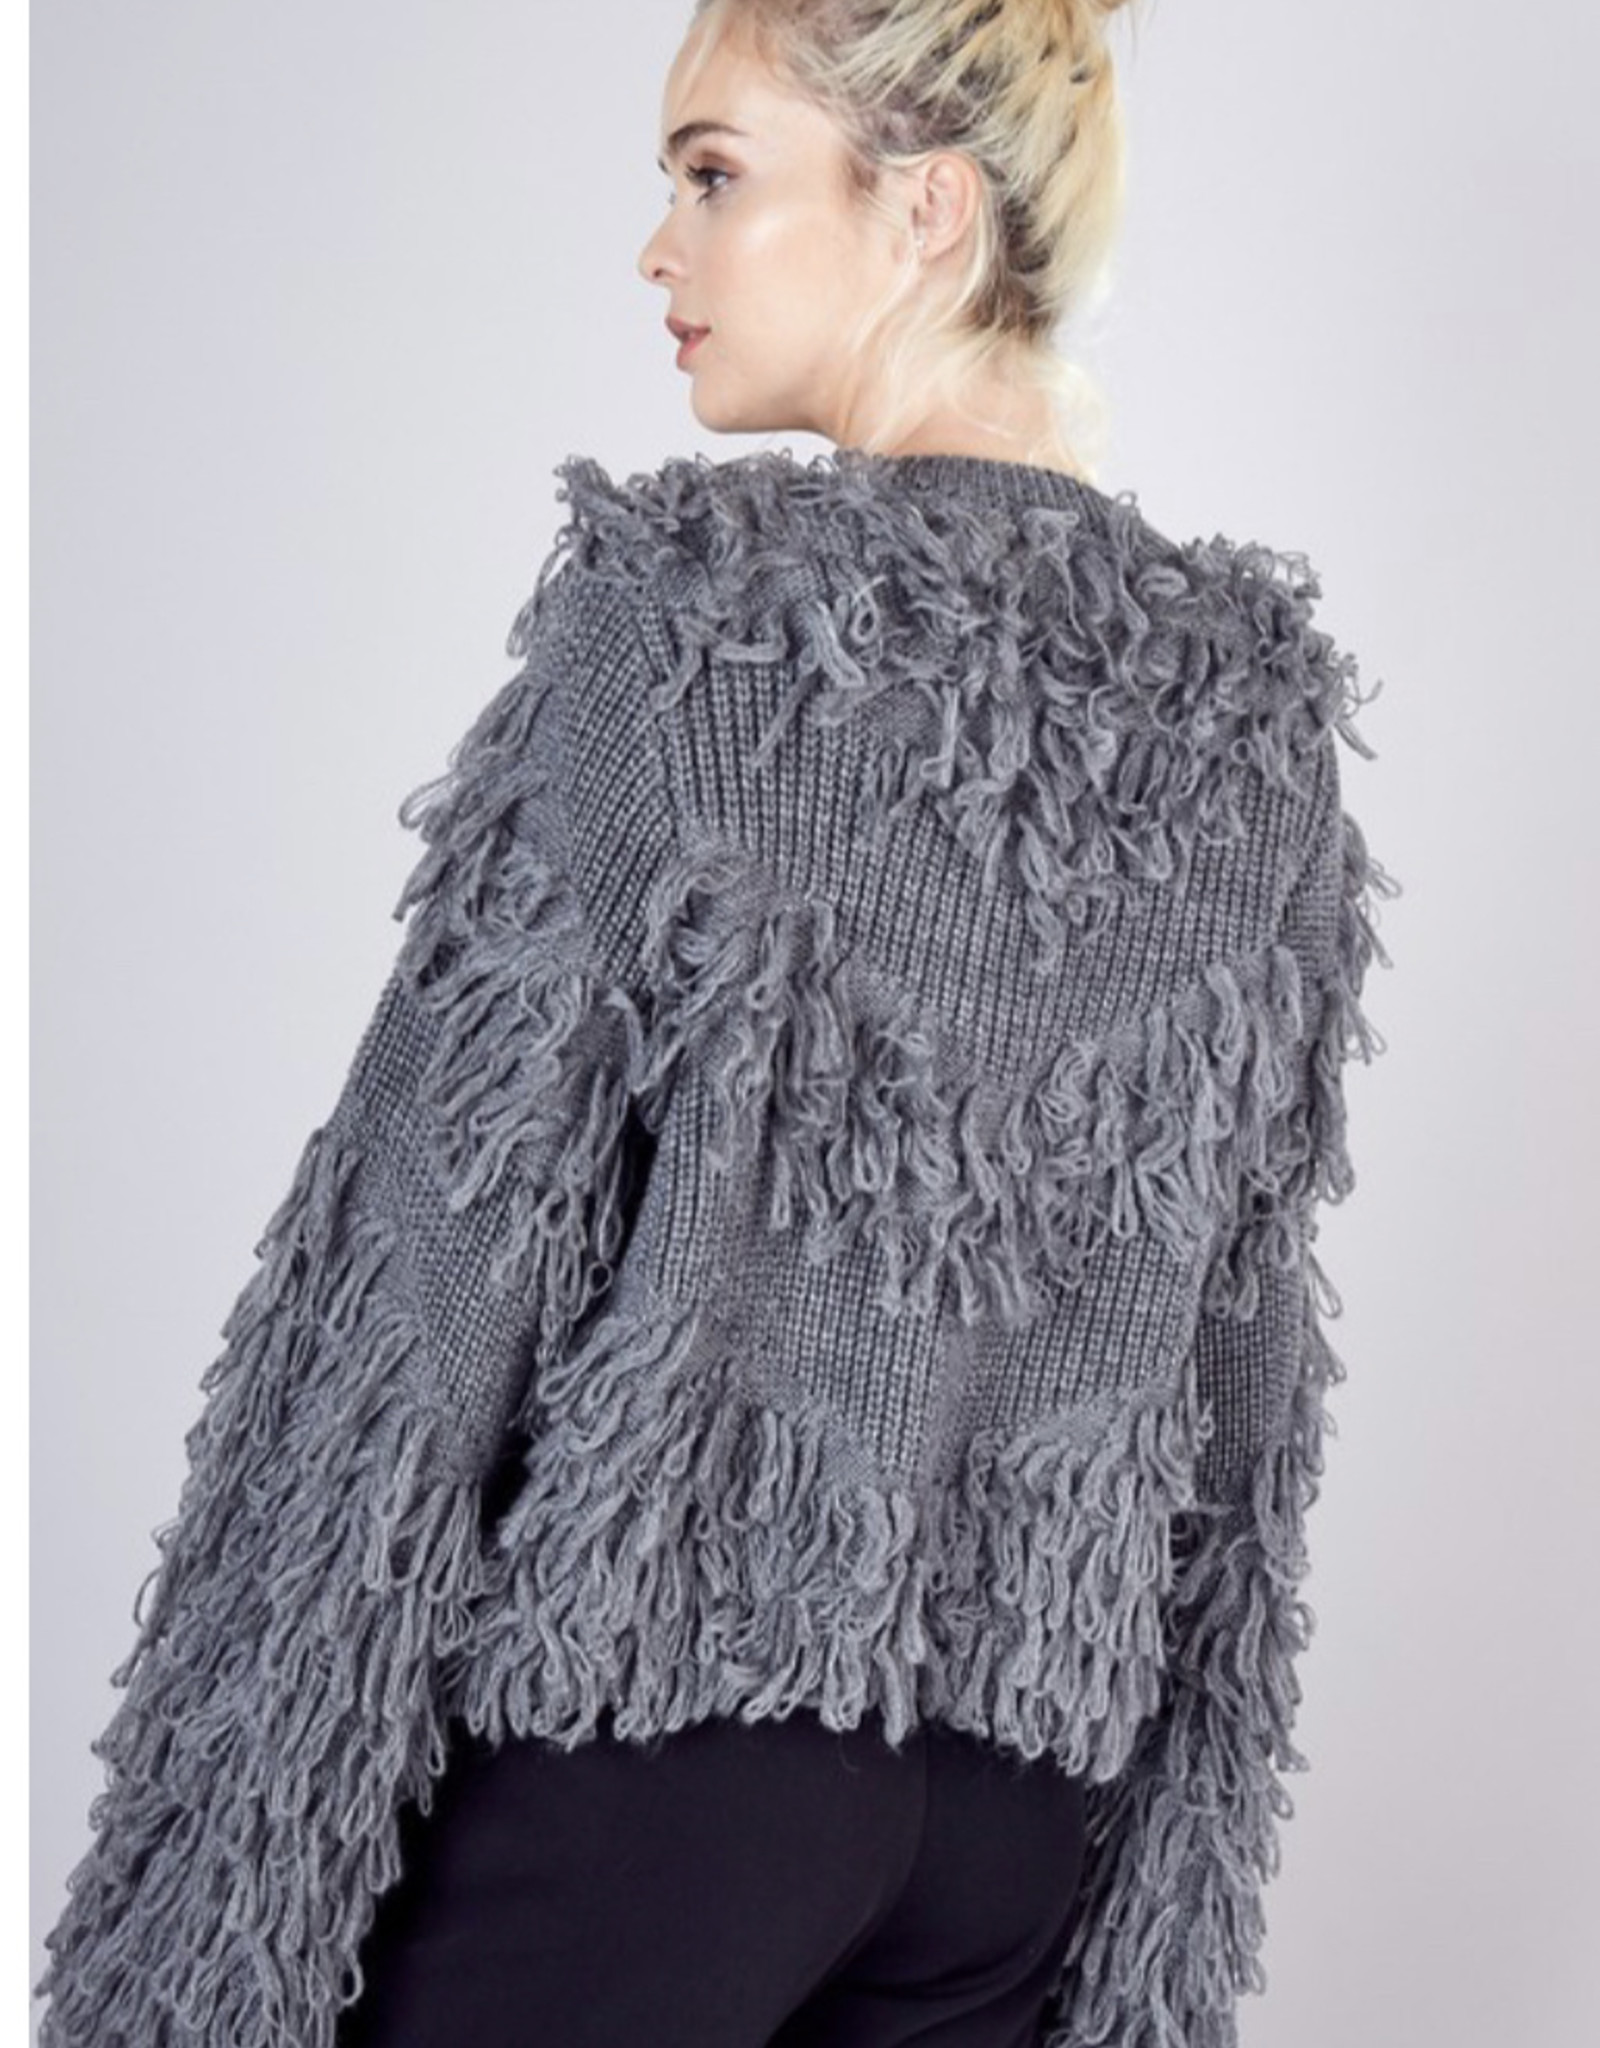 The Shaggy Chique Sweater